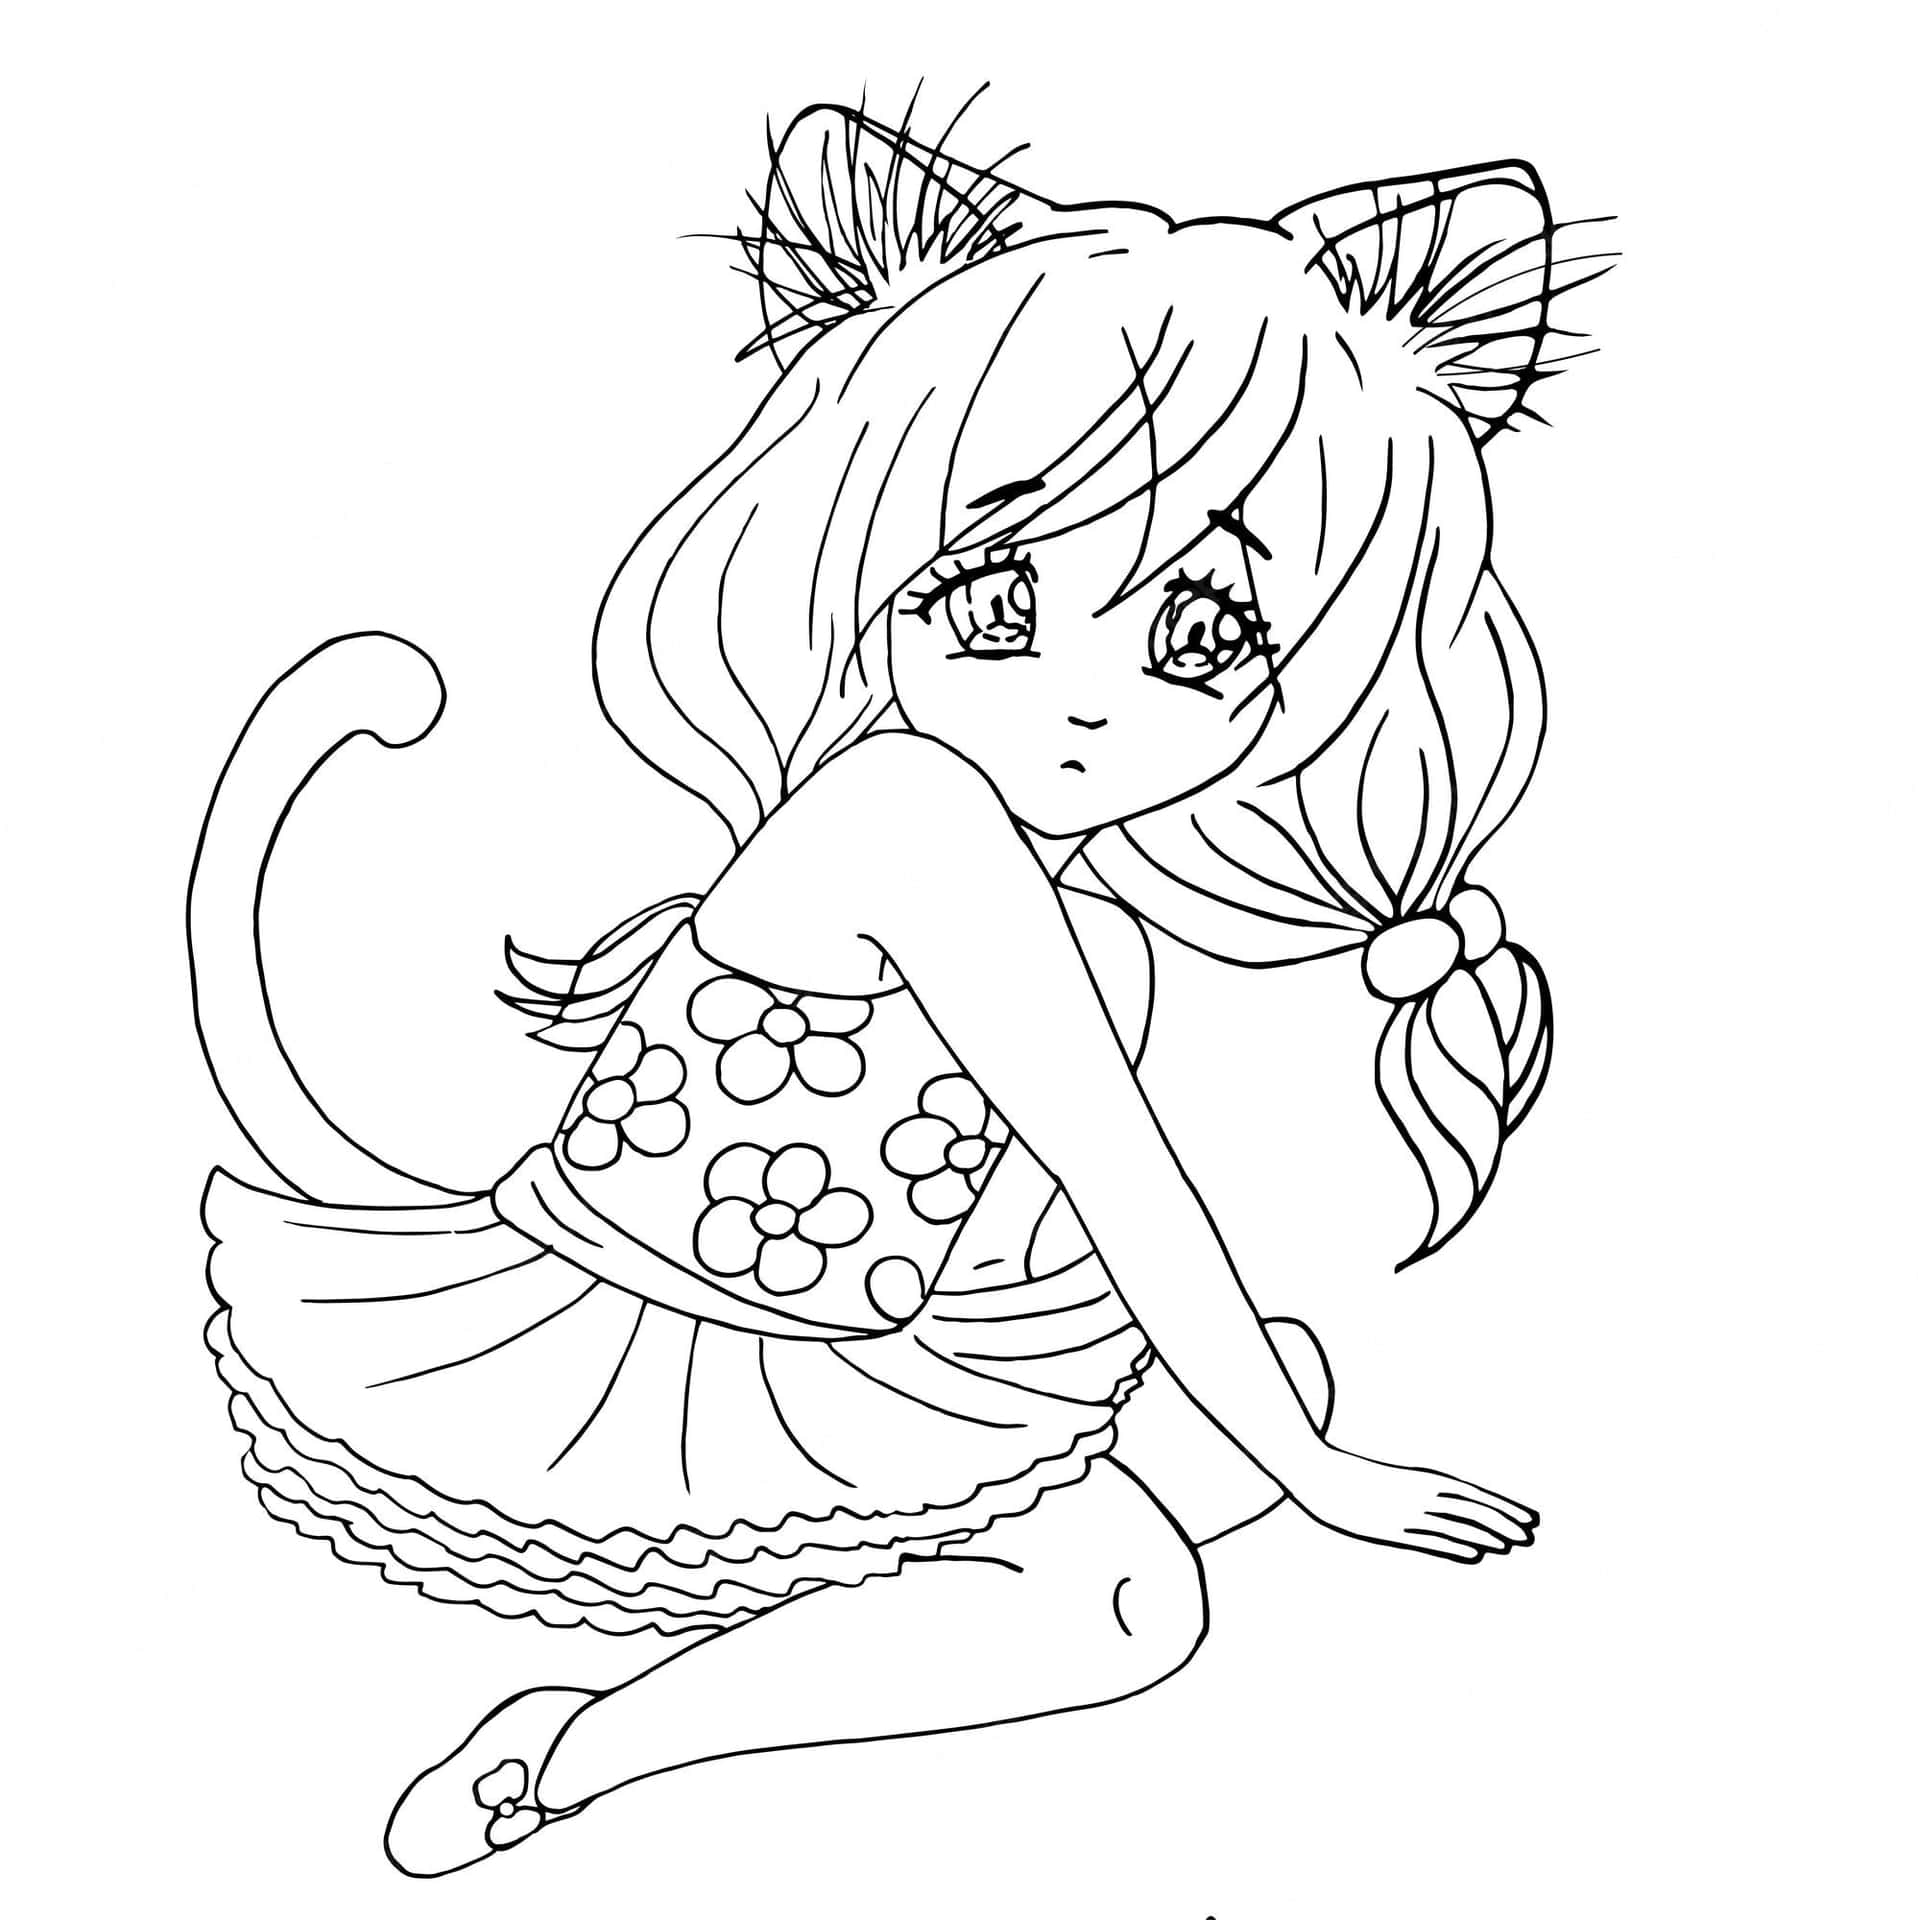 Cat Girl coloring page  Free Printable Coloring Pages